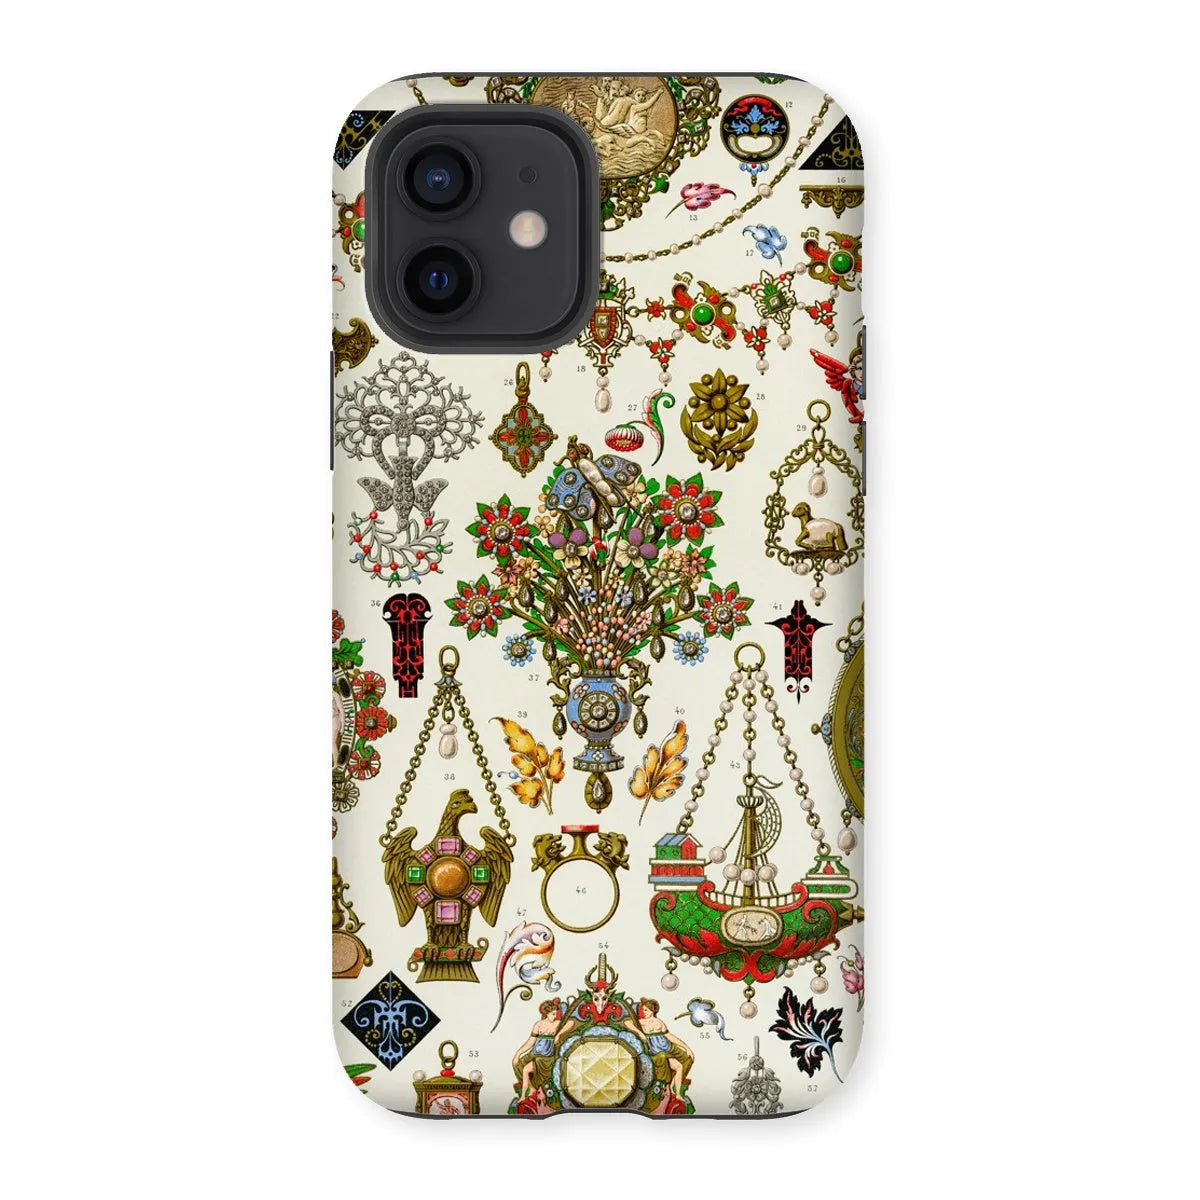 French Jewelry By Auguste Racinet Tough Phone Case - Iphone 12 / Matte - Mobile Phone Cases - Aesthetic Art